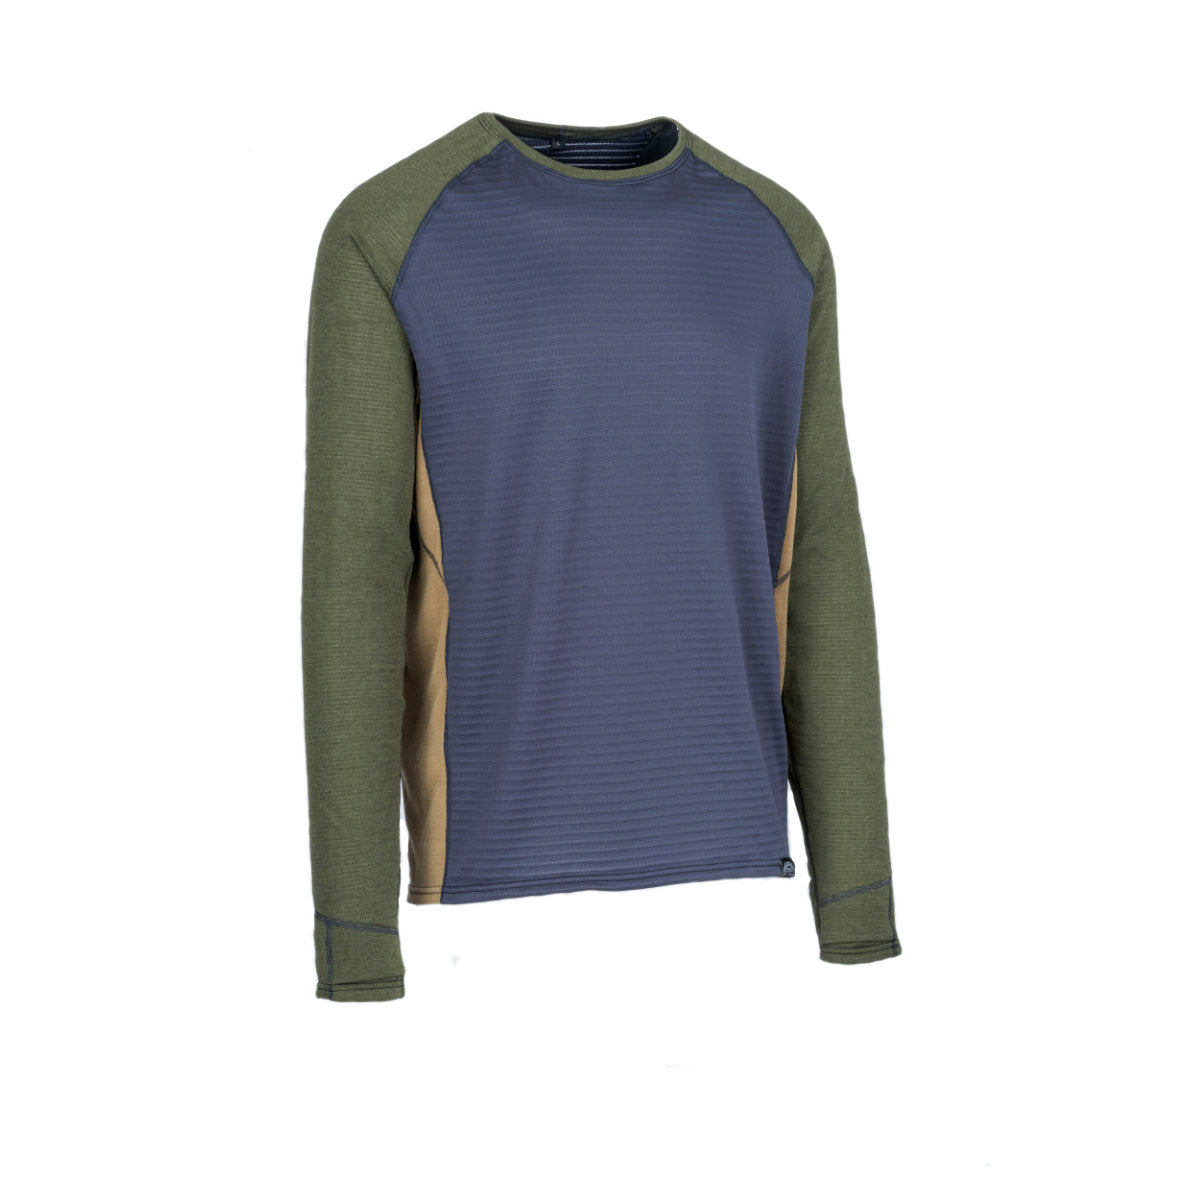 Immersion Shirt – Research | Baseline Crewneck Polartec® Research Immersion